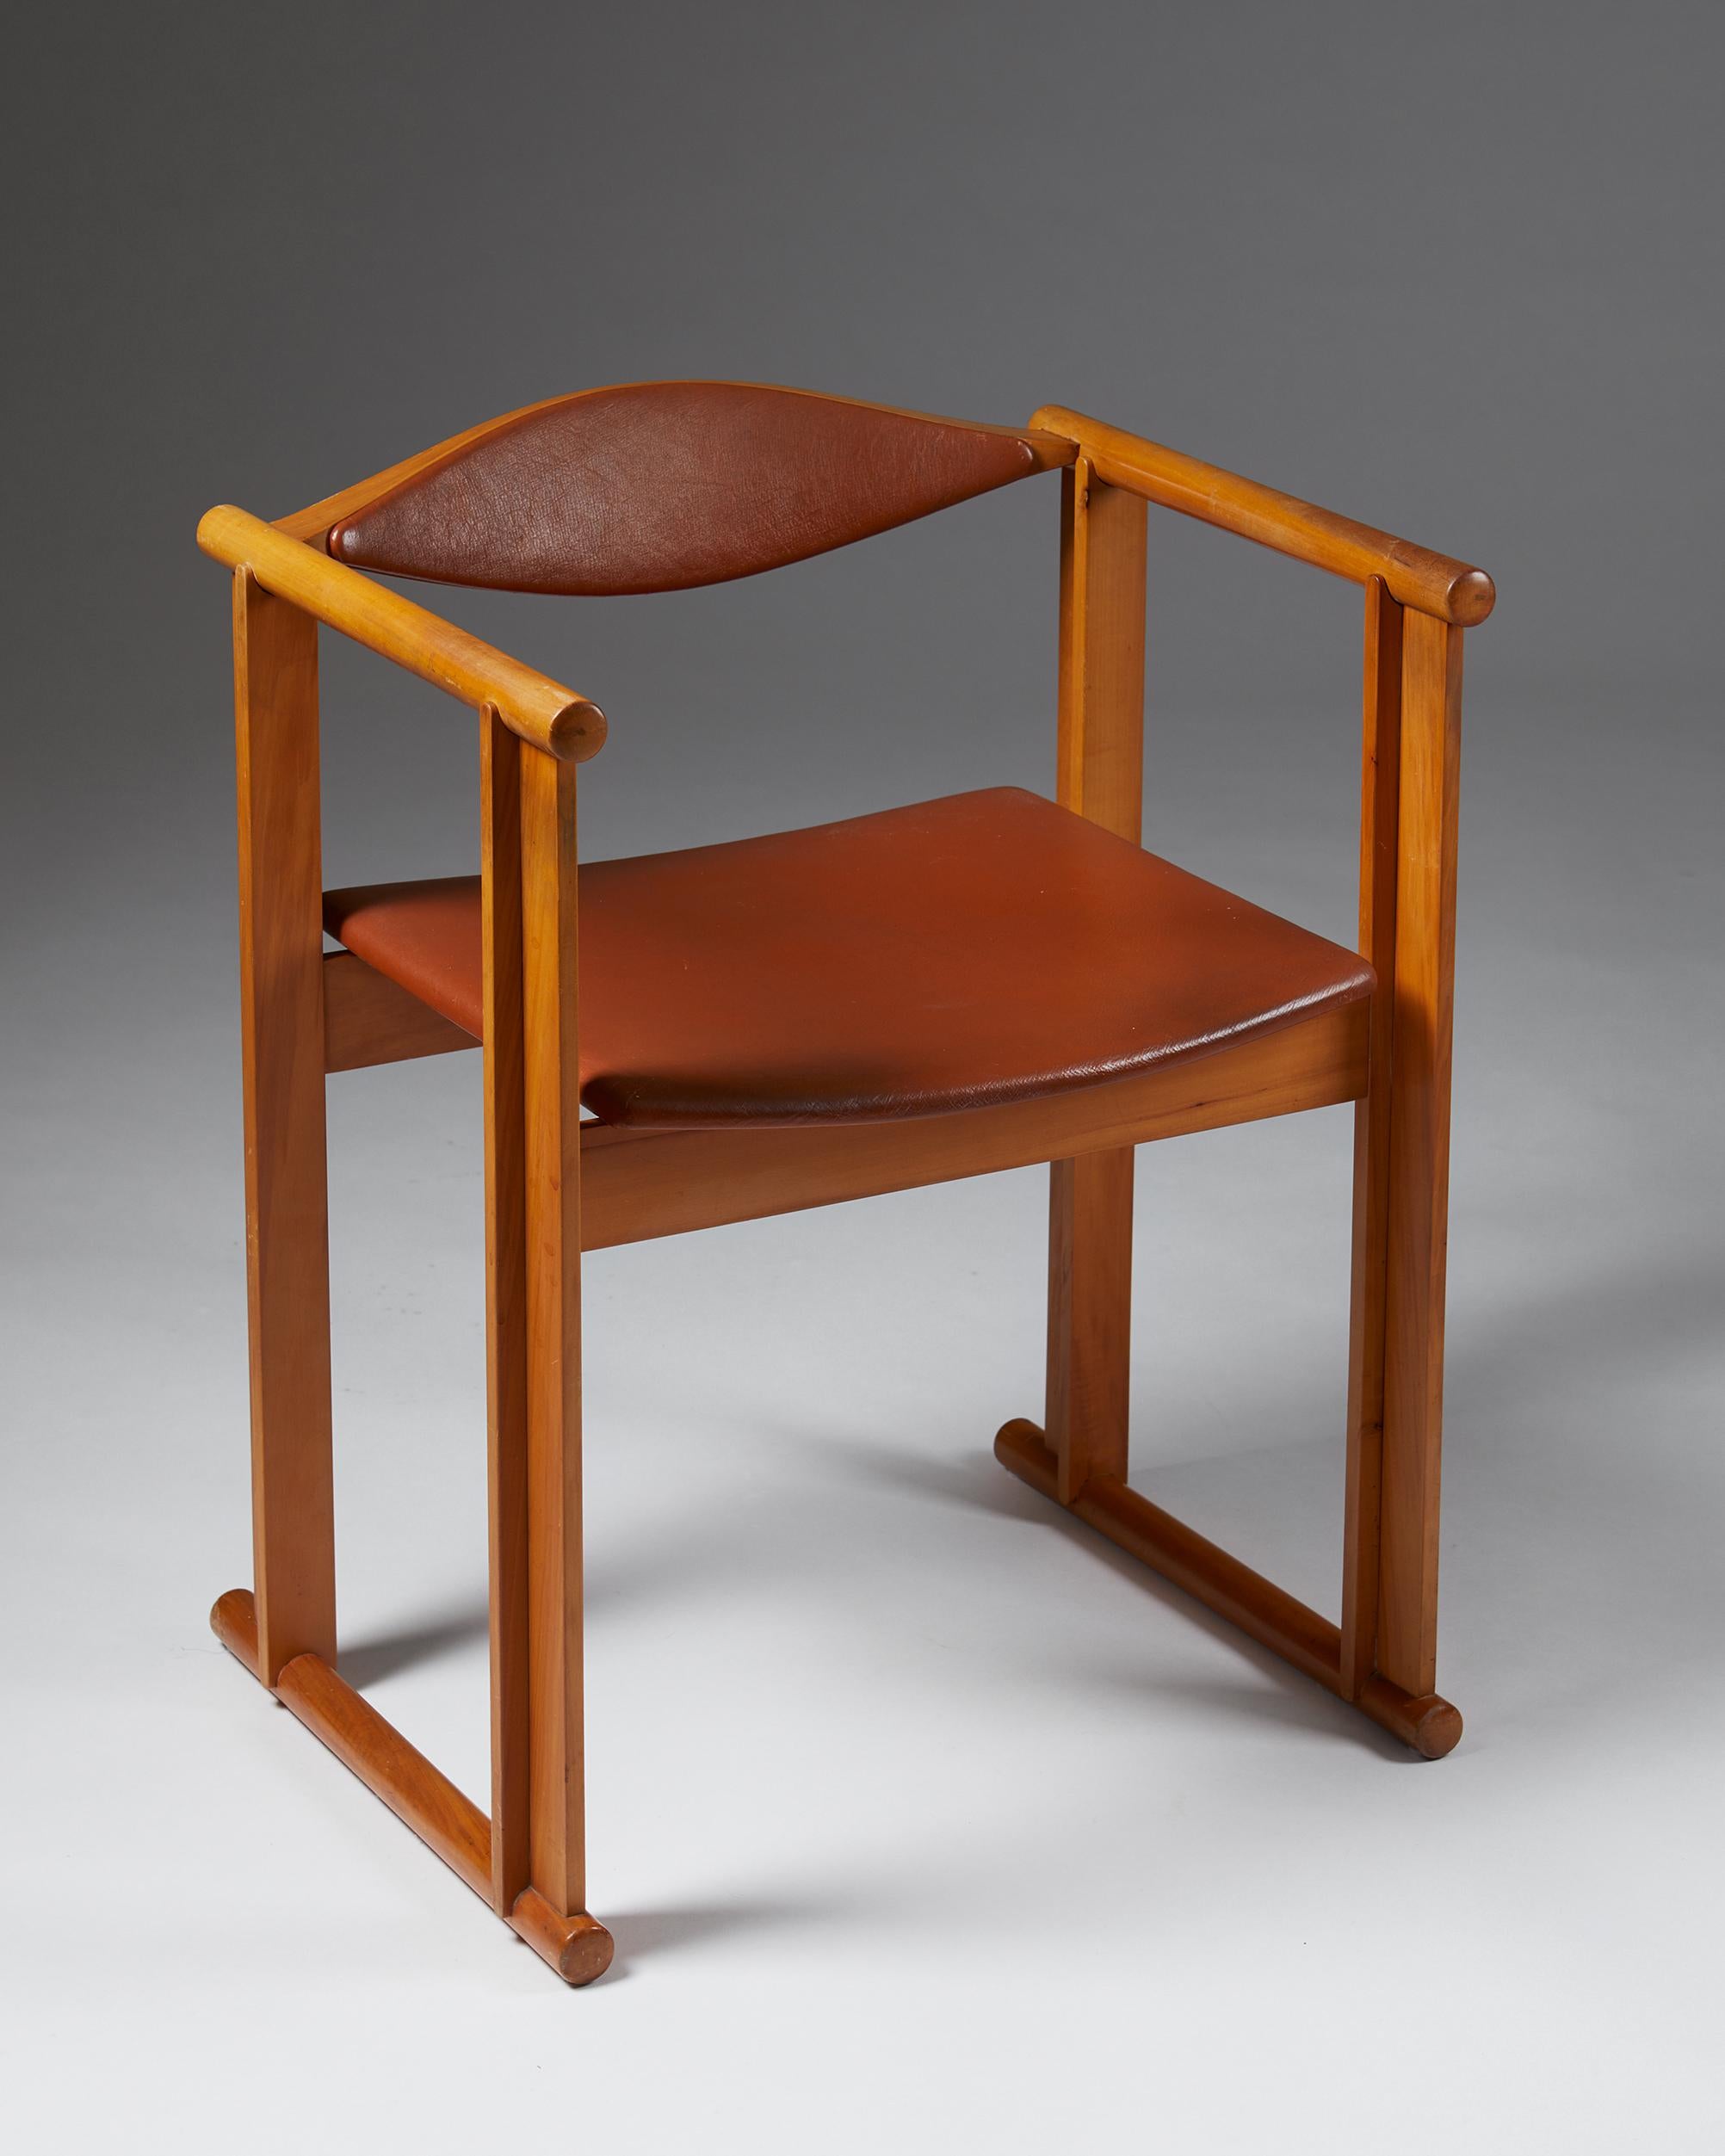 Armchair designed by Anders Berglund and Gösta Engström for Hans Johansson, HI-Gruppen, Sweden. 1960's.

Cherry wood frame, back and seat upholstered in leather.

Measurements: 
H: 69 cm/ 2' 3